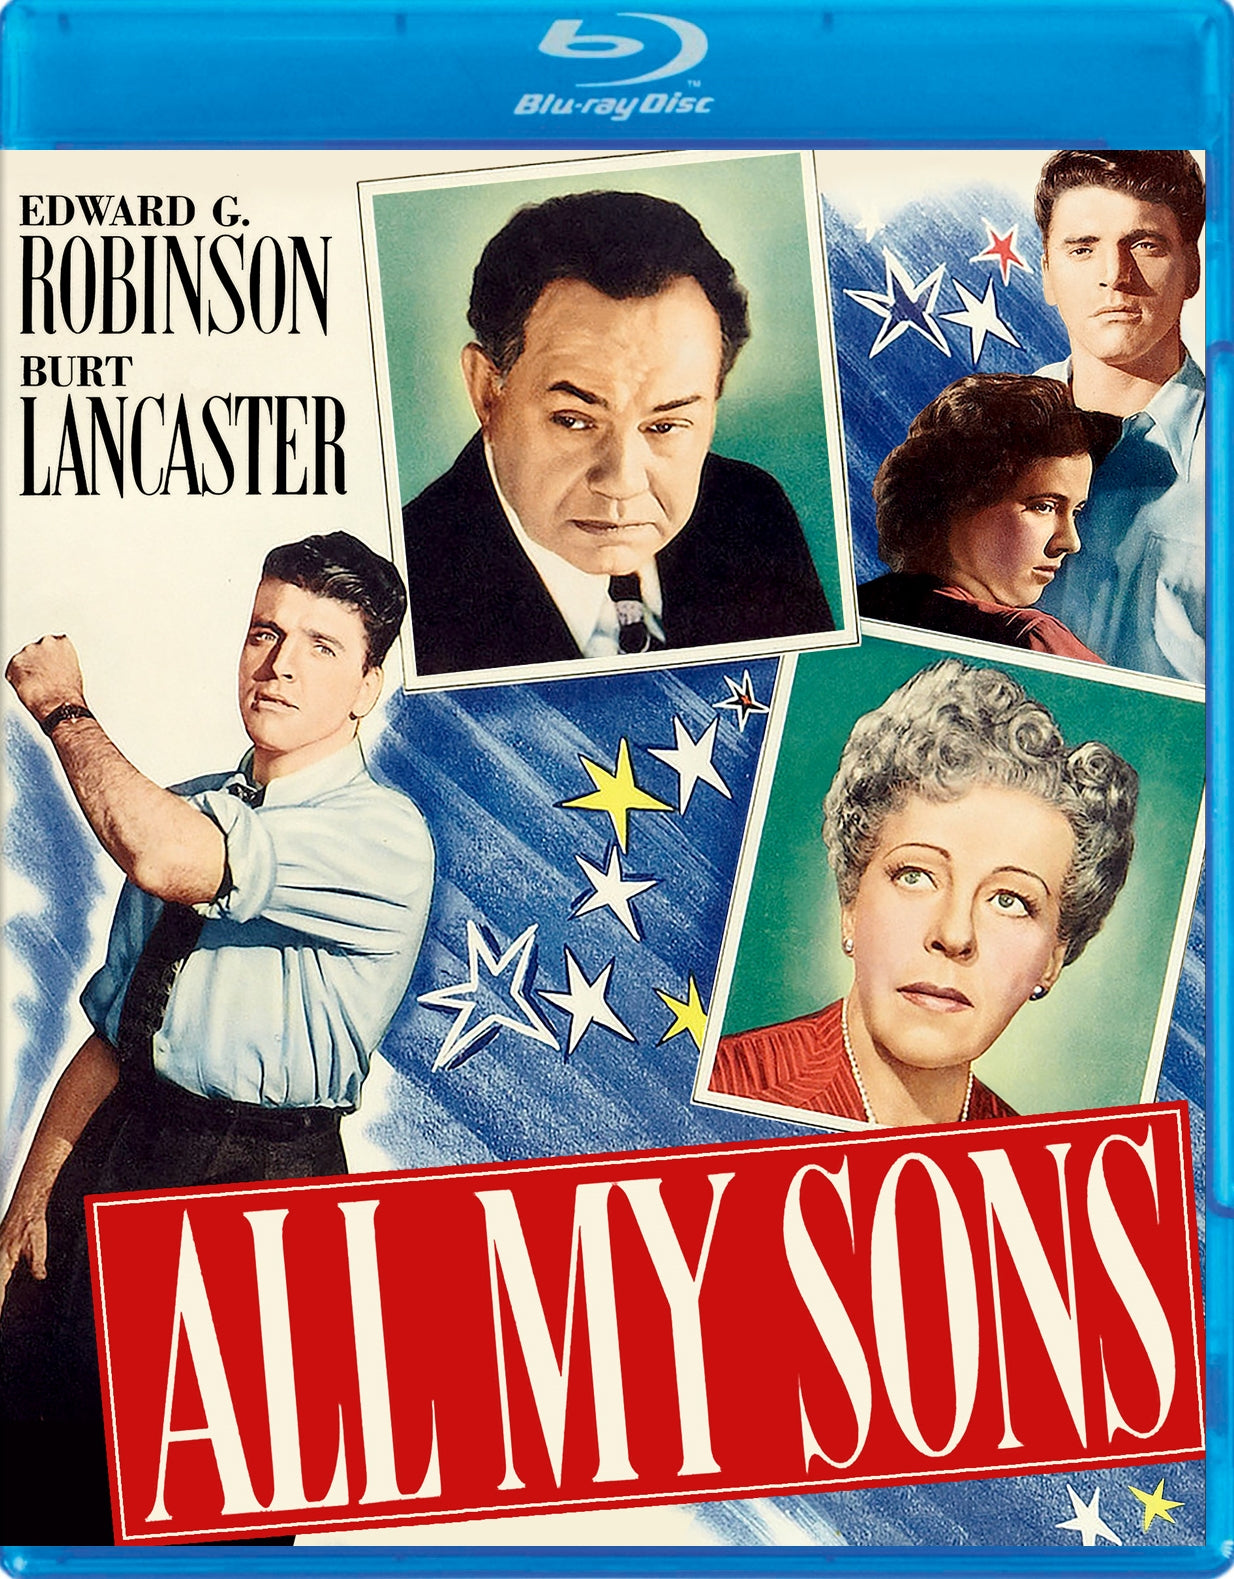 All My Sons [Blu-ray] cover art